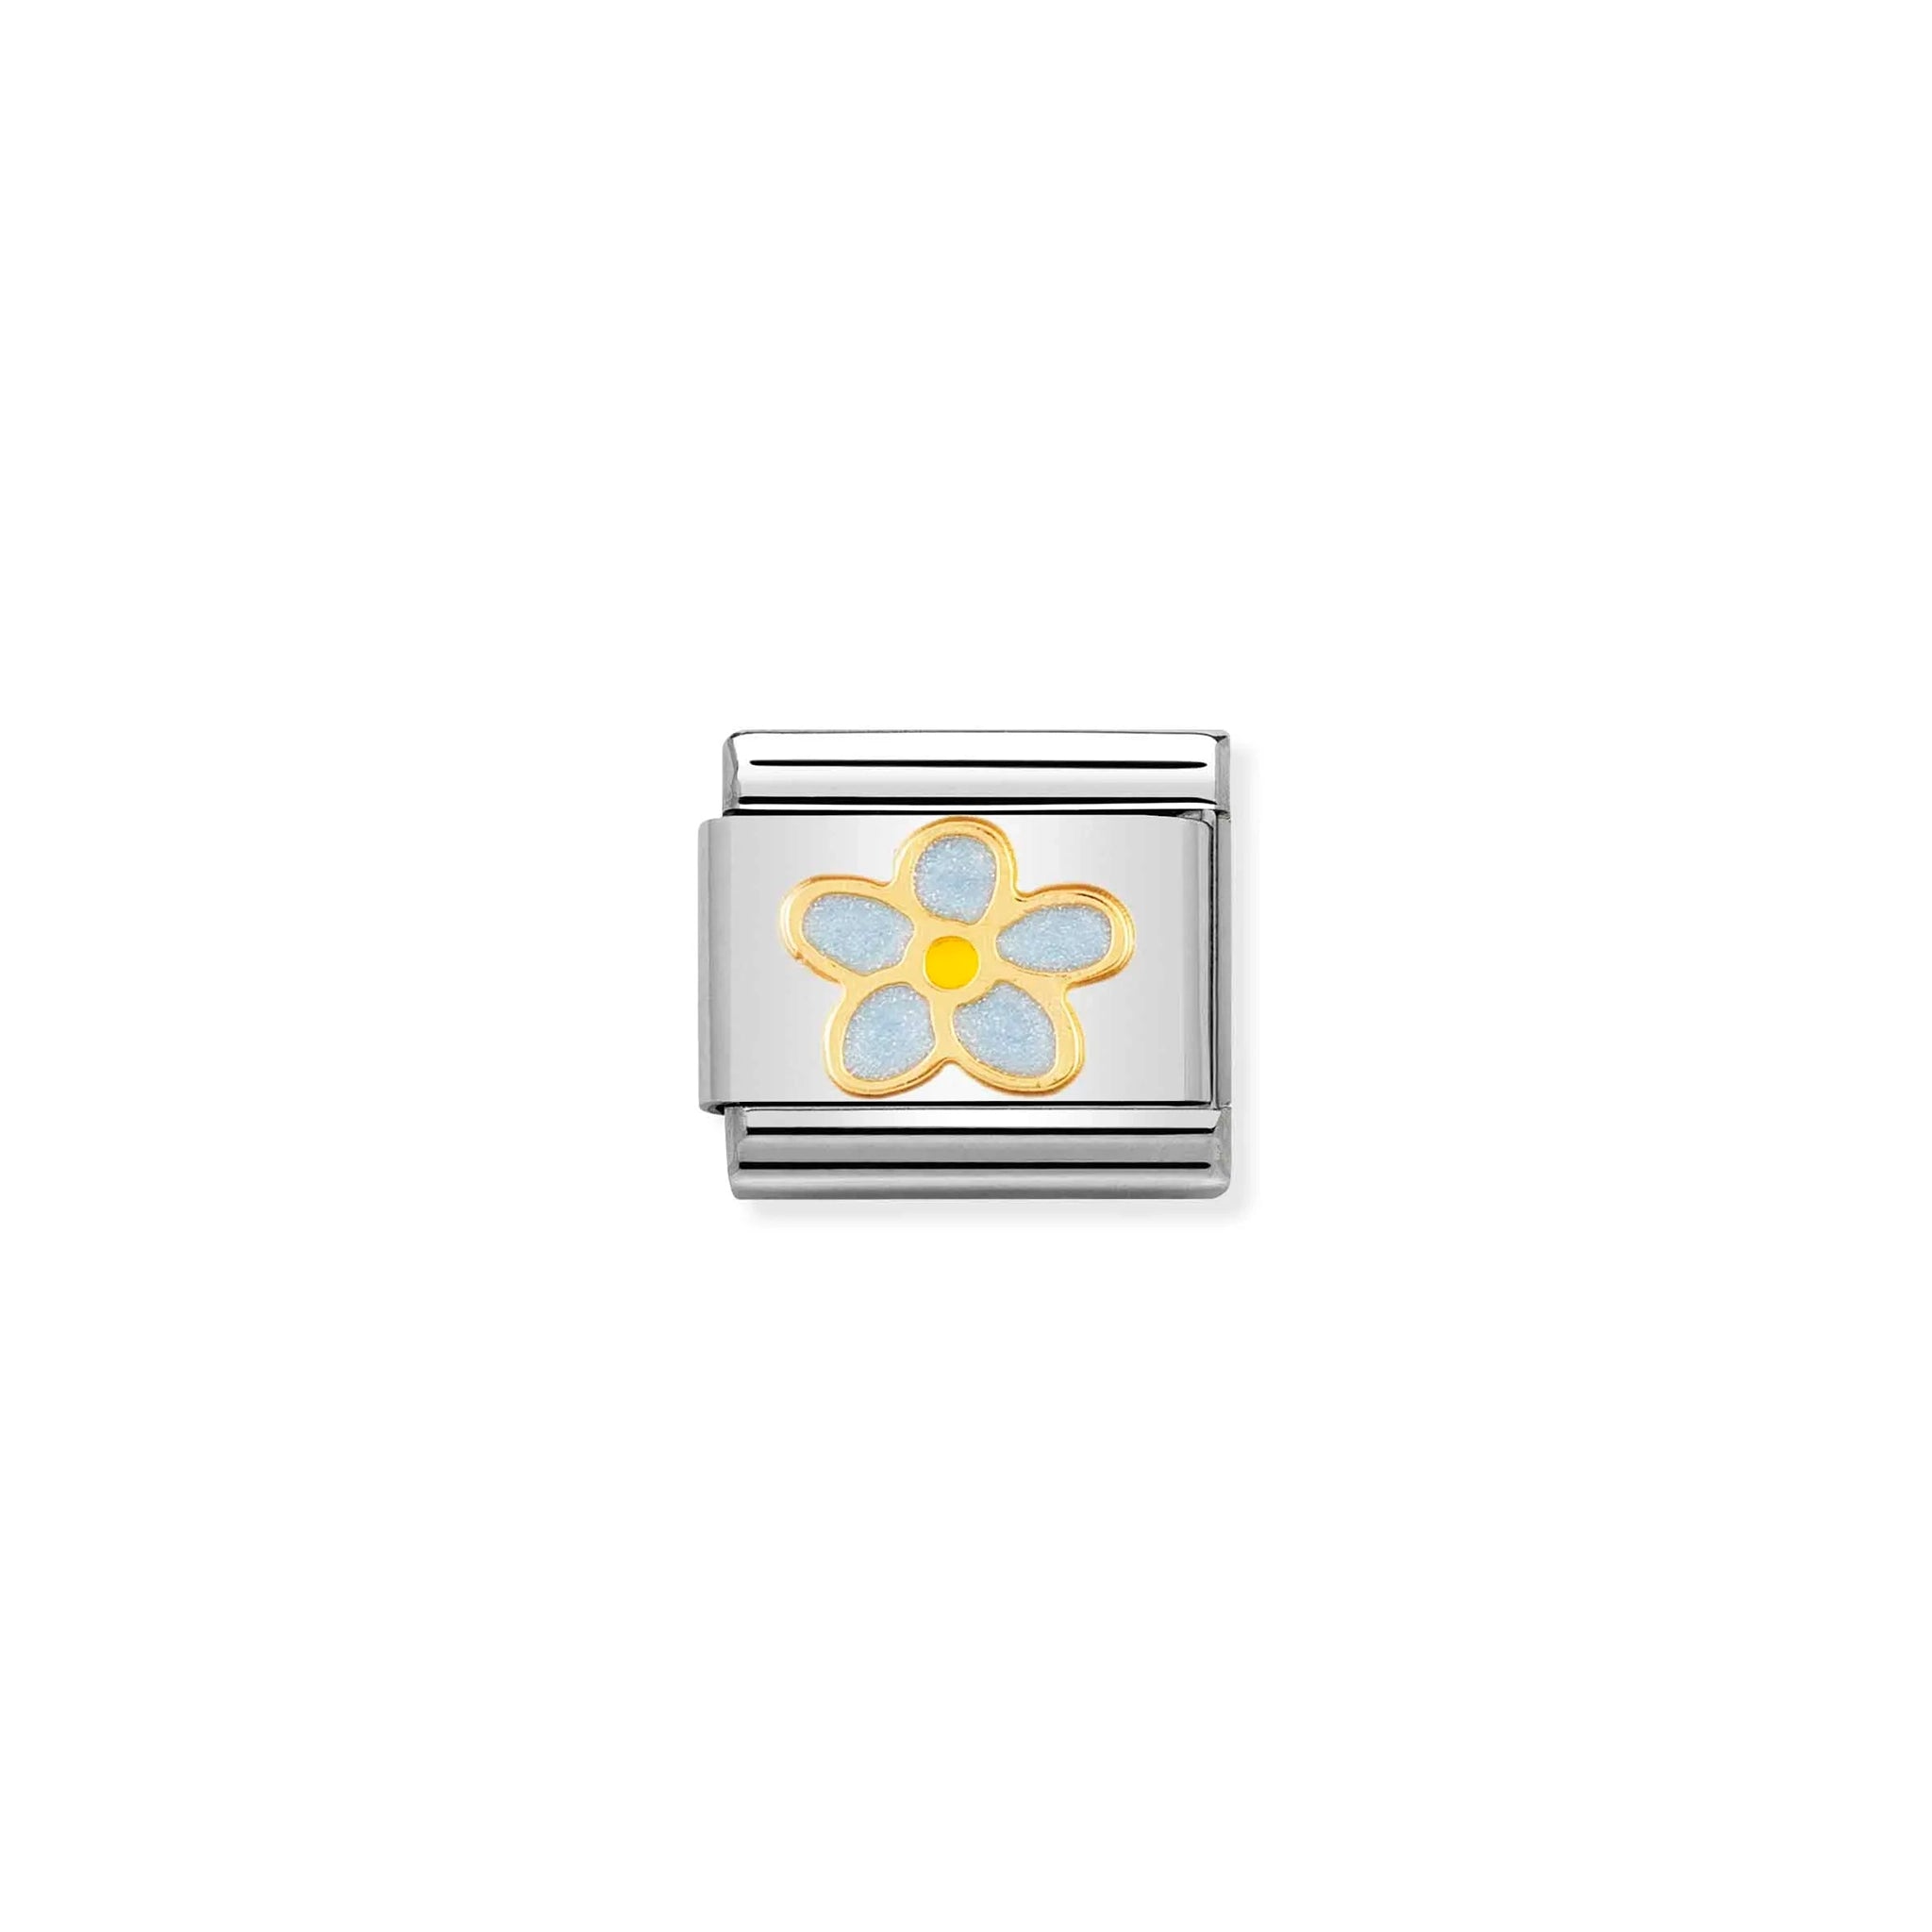 A Nomination link charm featuring a gold flower with light blue enamel petals and yellow centre